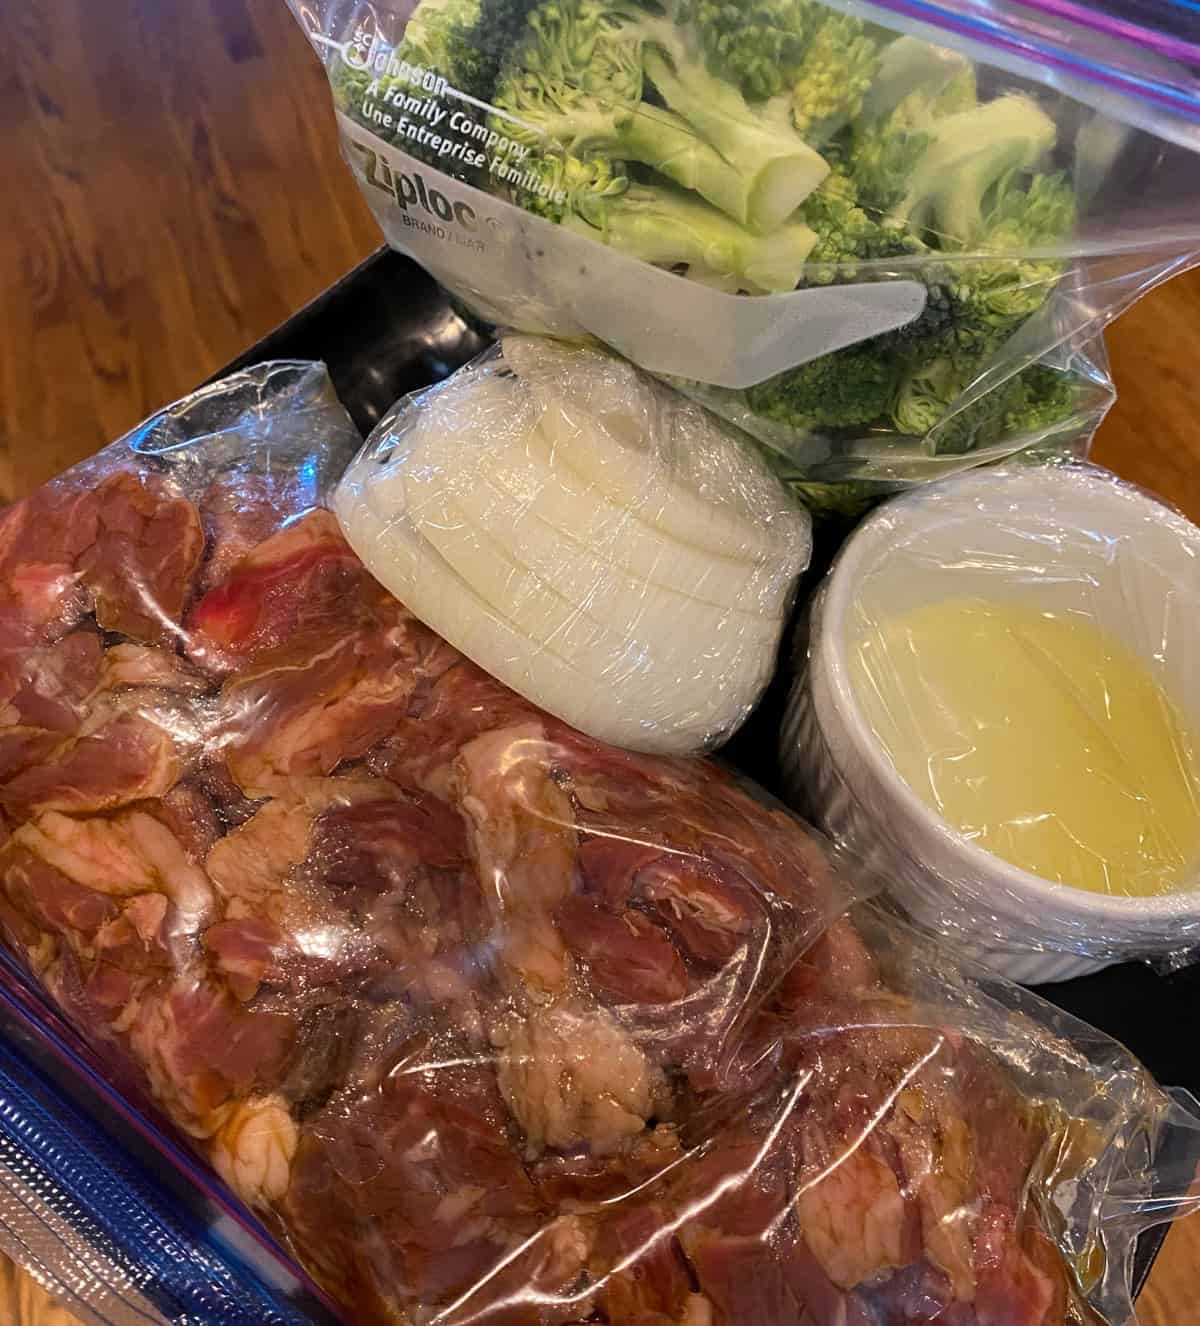 Ingredients for beef and broccoli cut and prepared ahead of time.